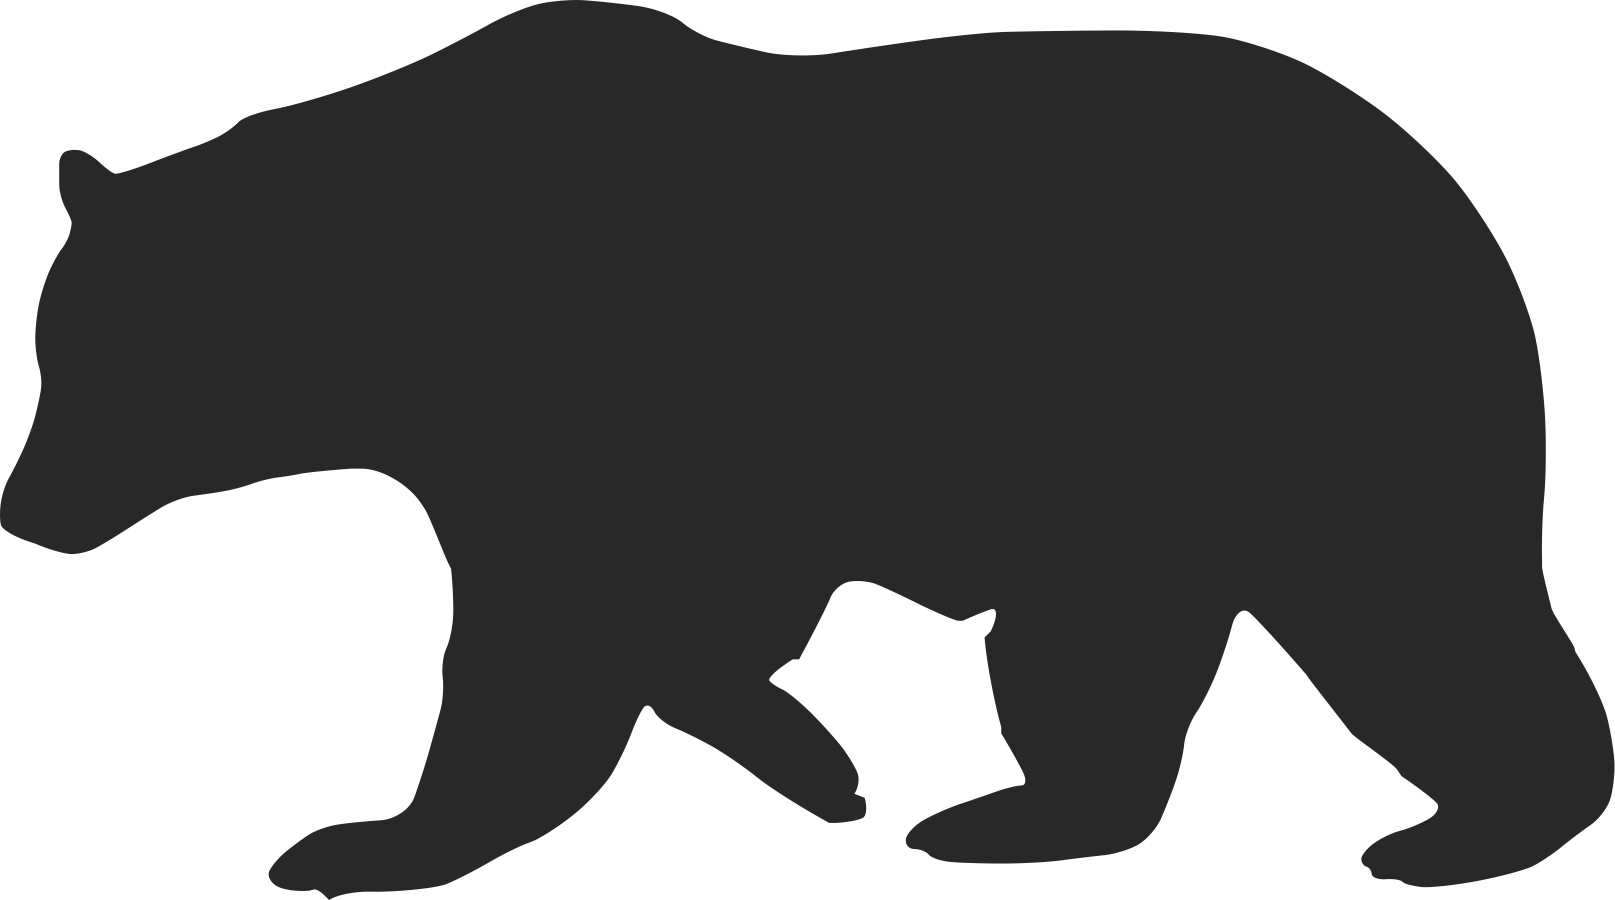 Best Photos of Grizzly Bear Outline - Grizzly Bear Outline ...